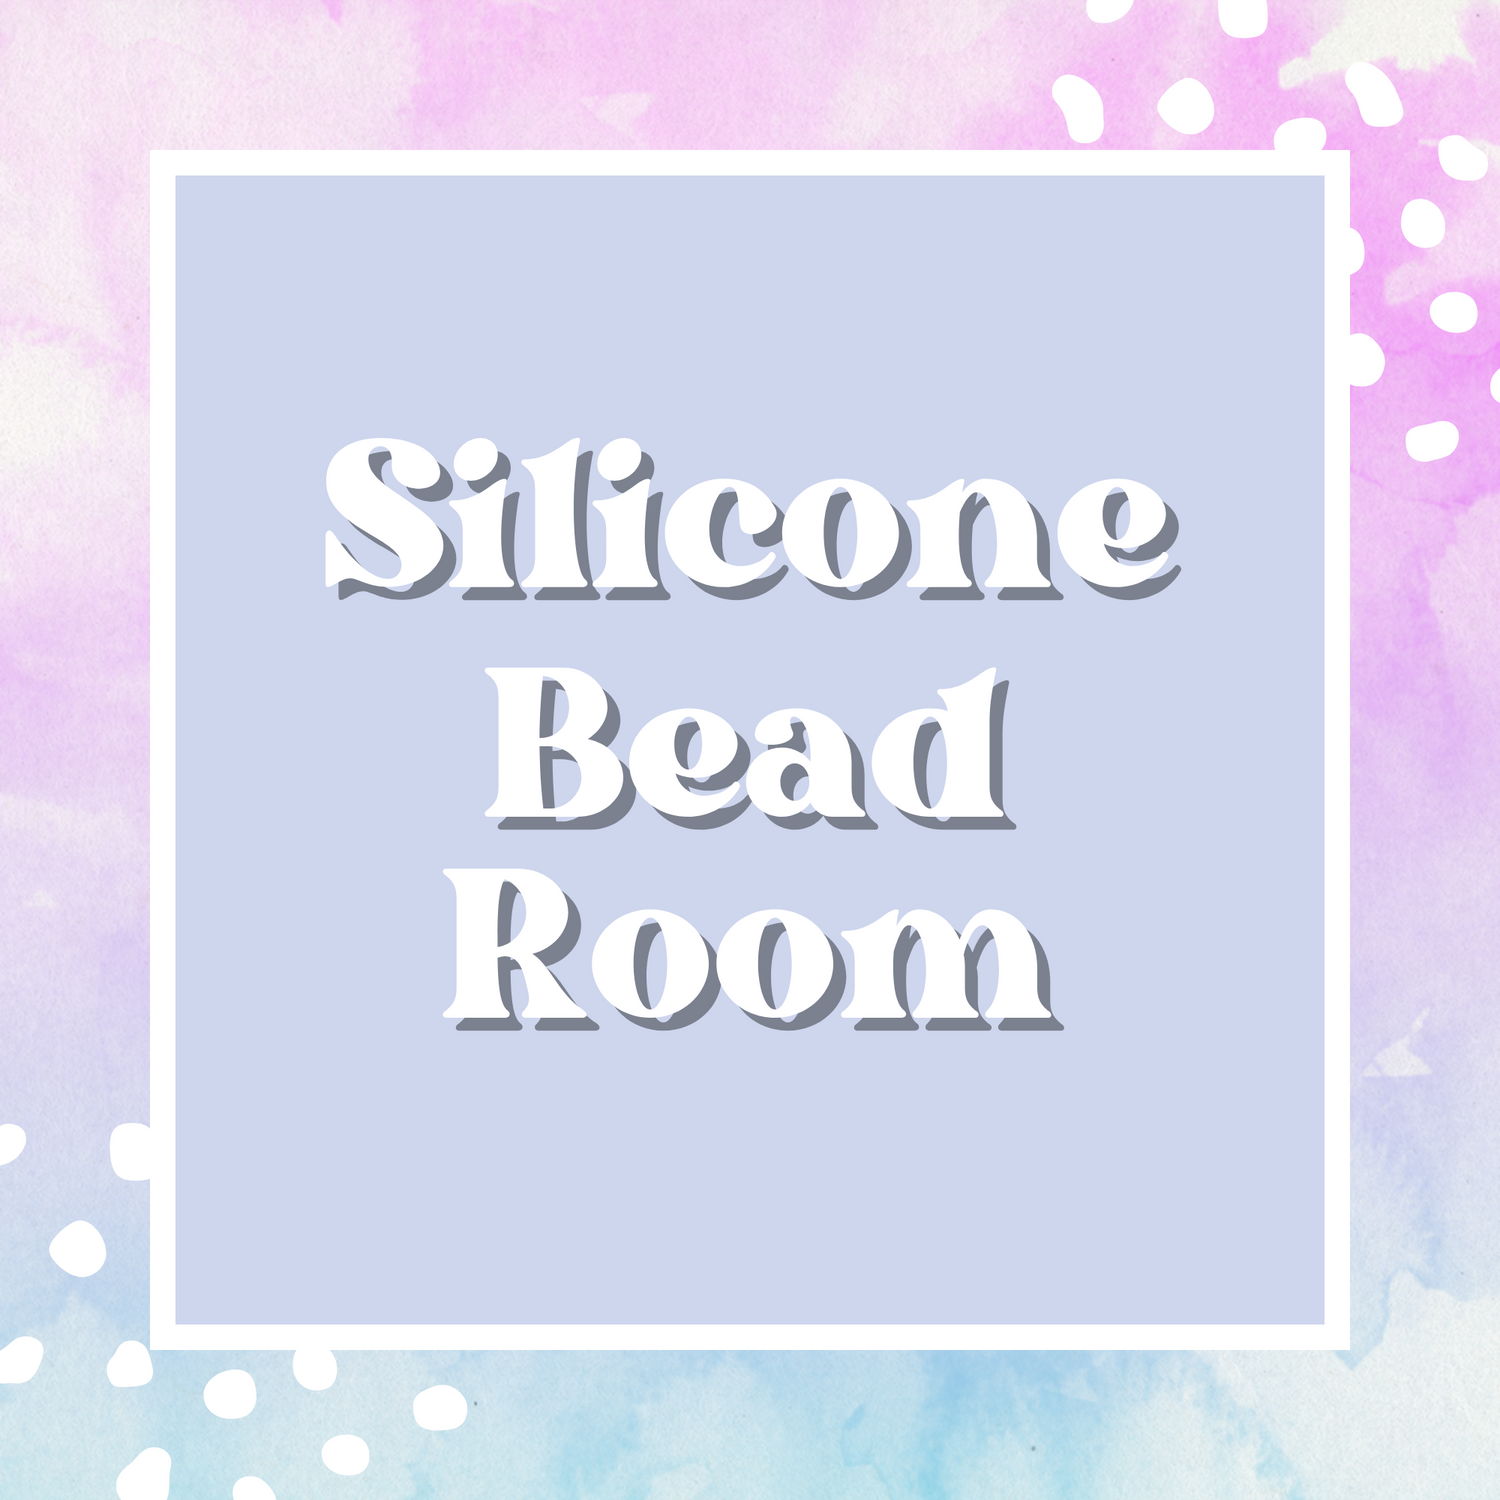 Silicone Bead Room